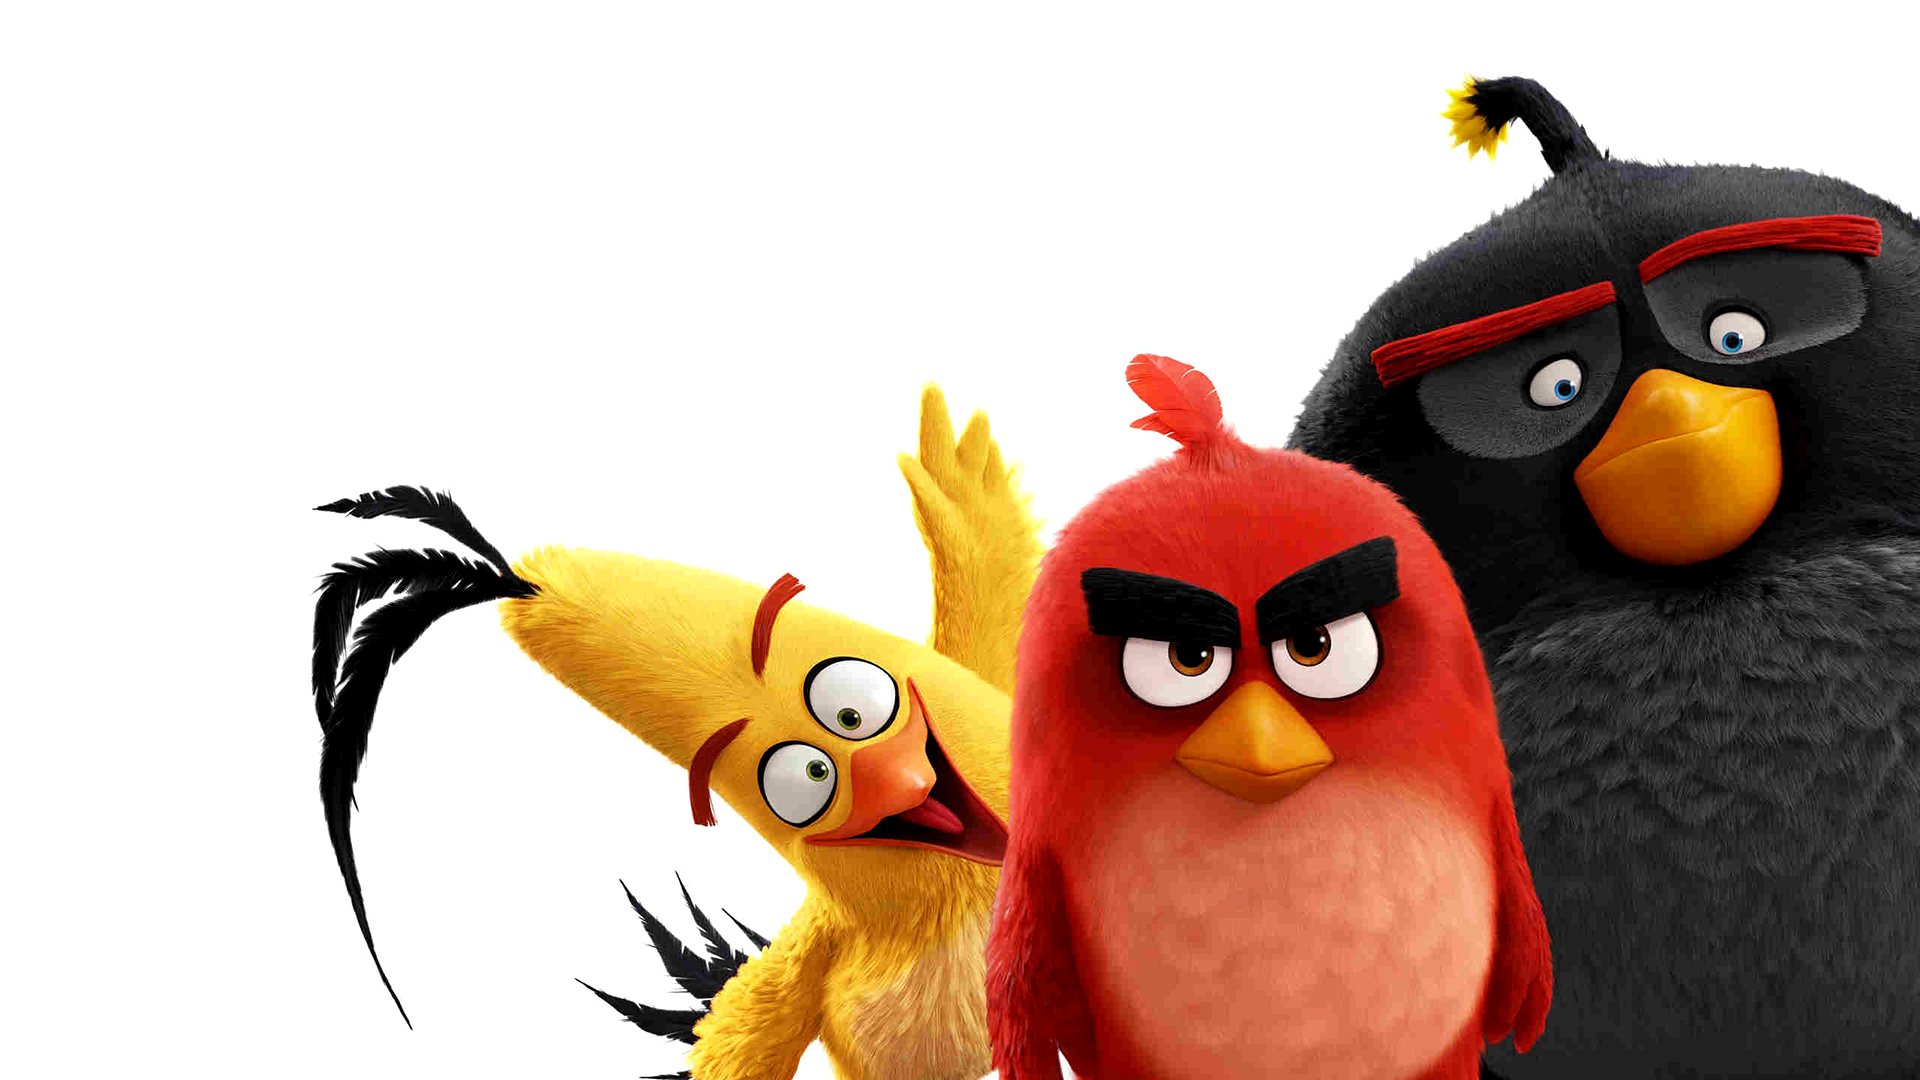 The Angry Birds Movie Hd Wallpaper Background Image 1920x1080